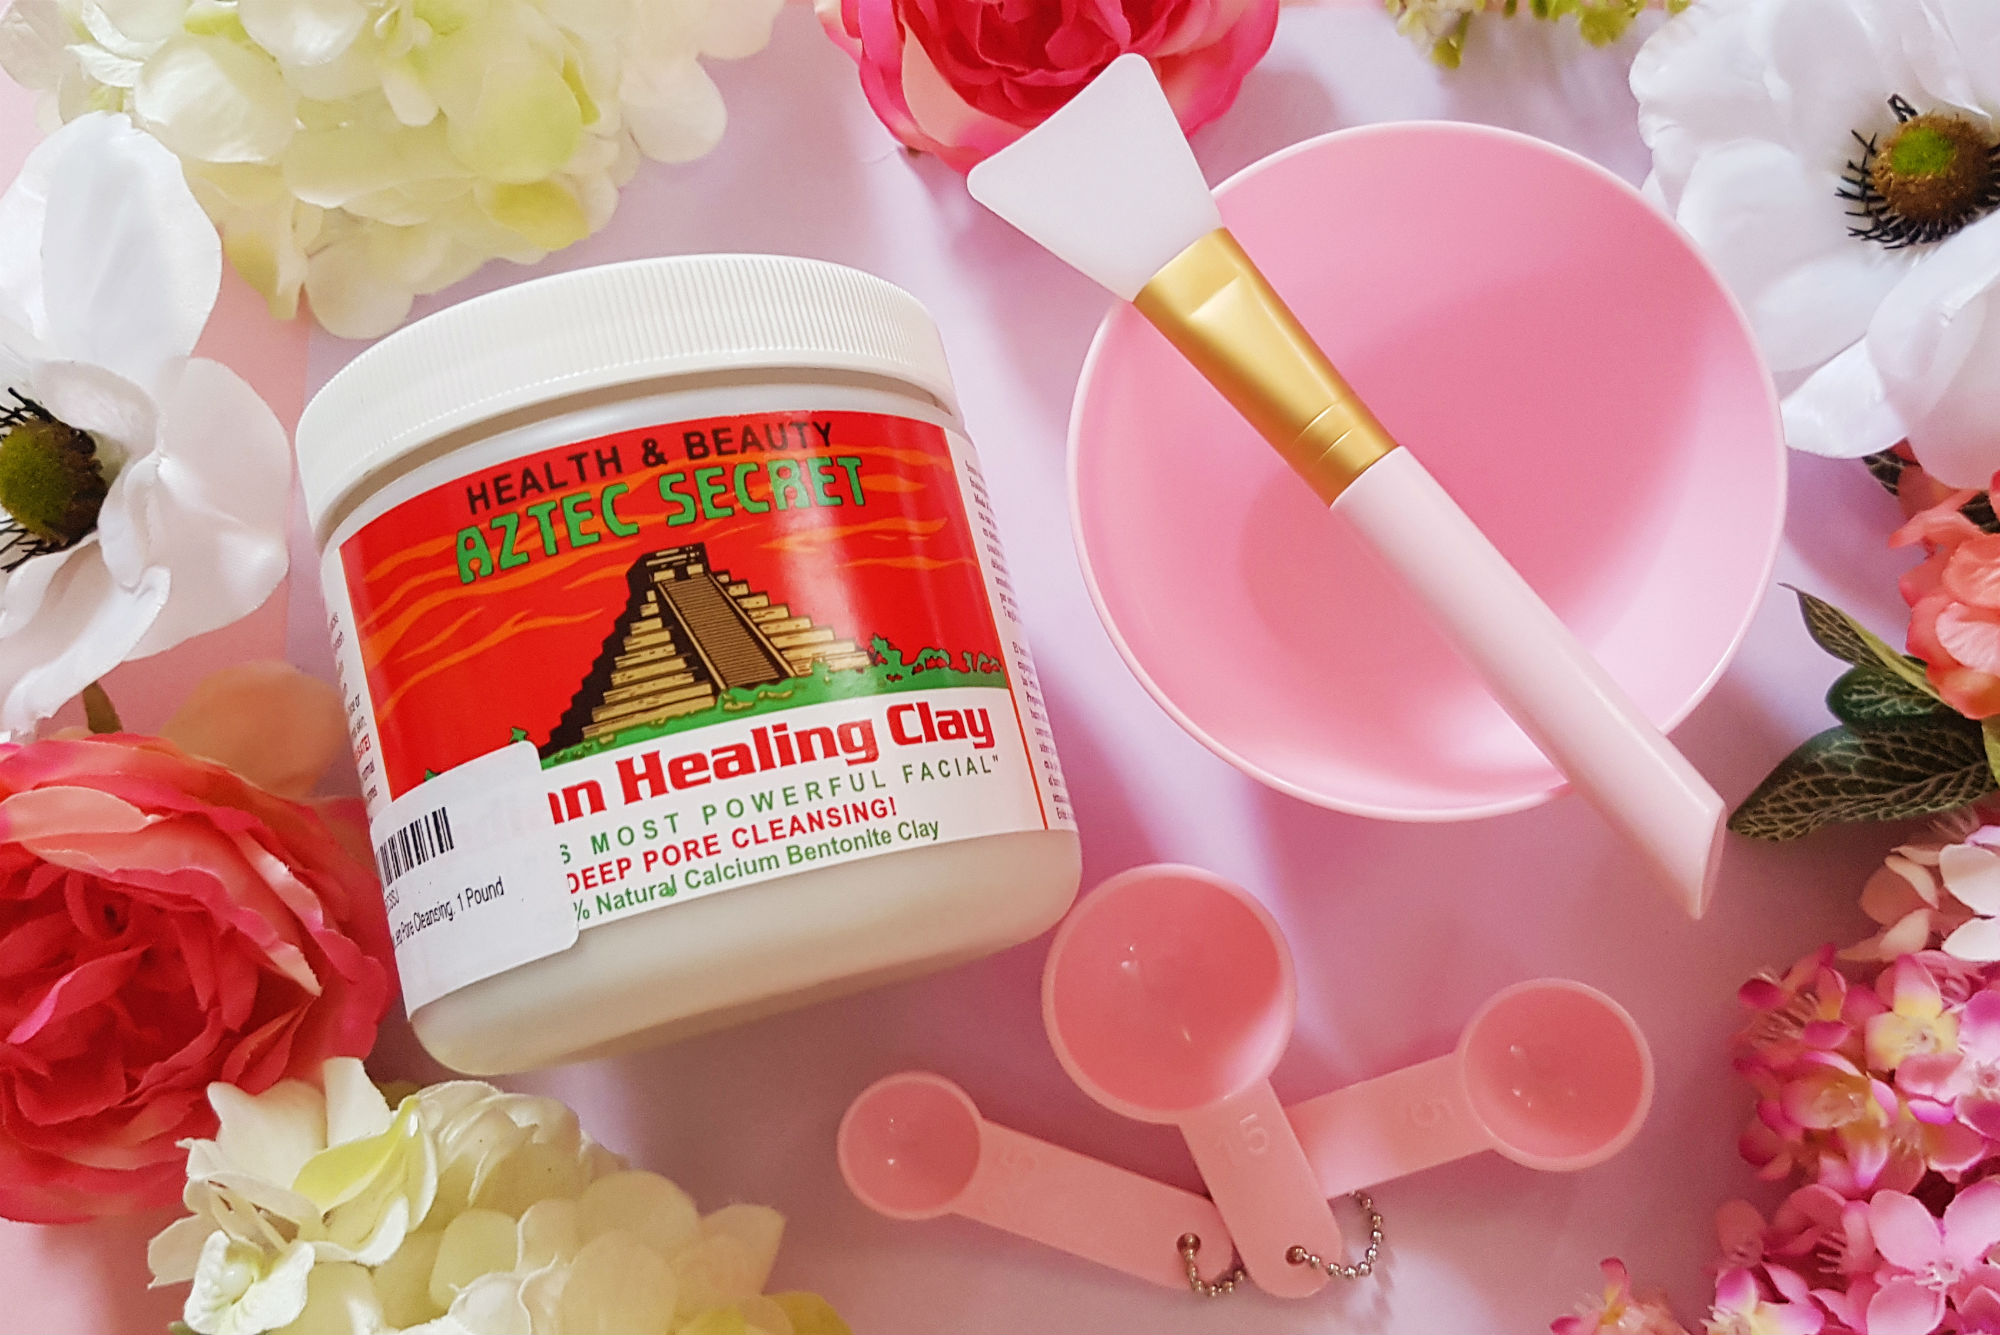 Secret Indian Healing Clay Review - Style Vanity